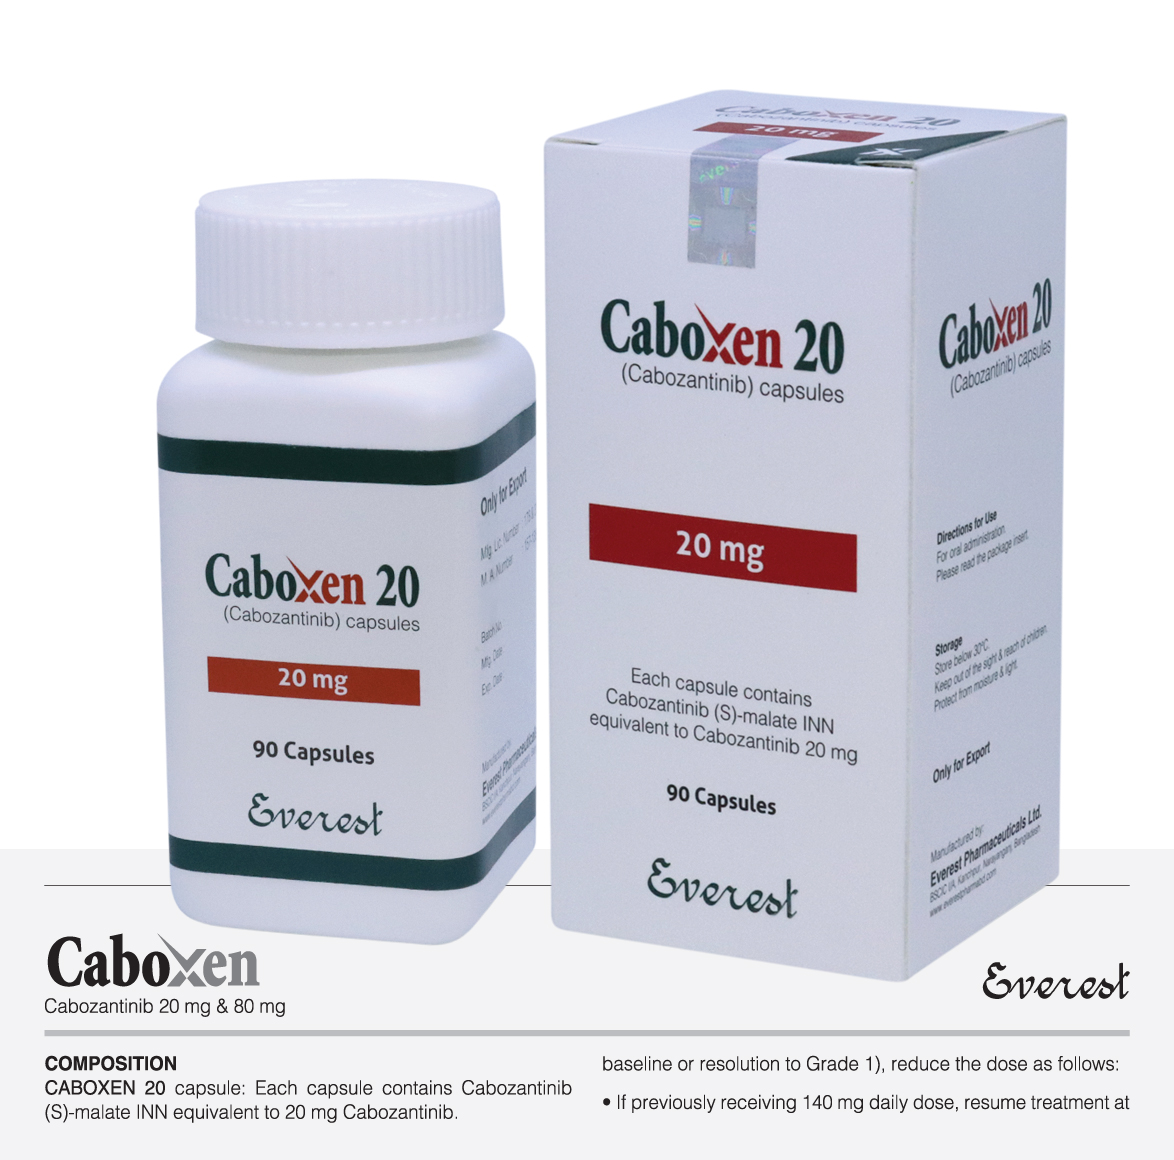 CABOMETYX is a medication used to treat people with certain types of thyroid, liver, and advanced kidney cancers. See important safety information. #CABOMETYX #Cometriq #Cabozantinib #kidneycancerMedicine_price whatsapp : +8801929123476